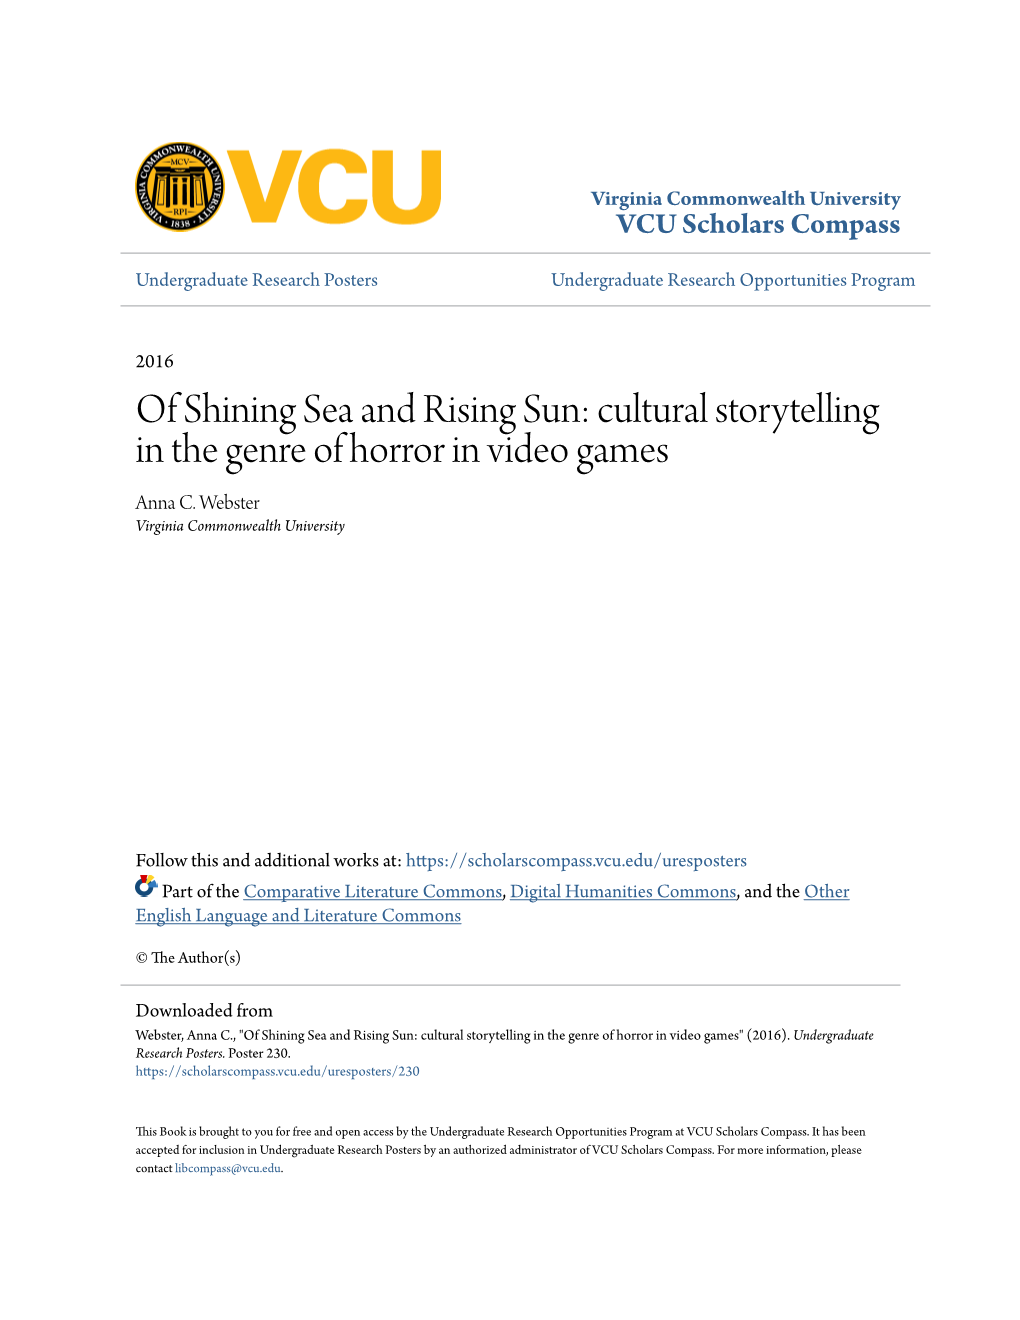 Of Shining Sea and Rising Sun: Cultural Storytelling in the Genre of Horror in Video Games Anna C